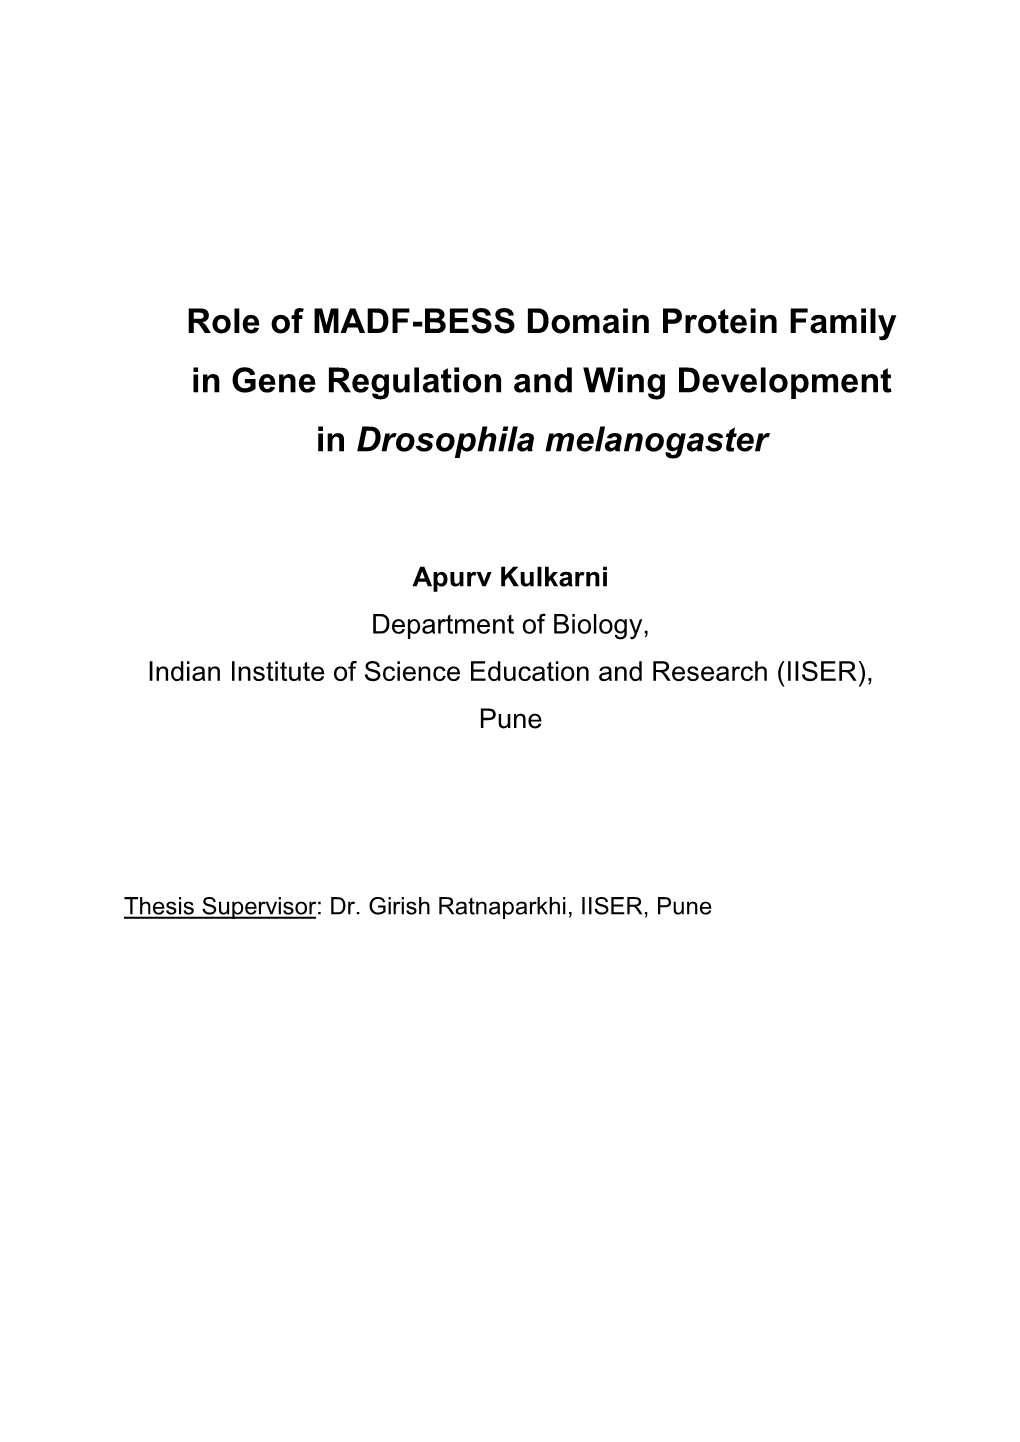 Role of MADF-BESS Domain Protein Family in Gene Regulation and Wing Development in Drosophila Melanogaster